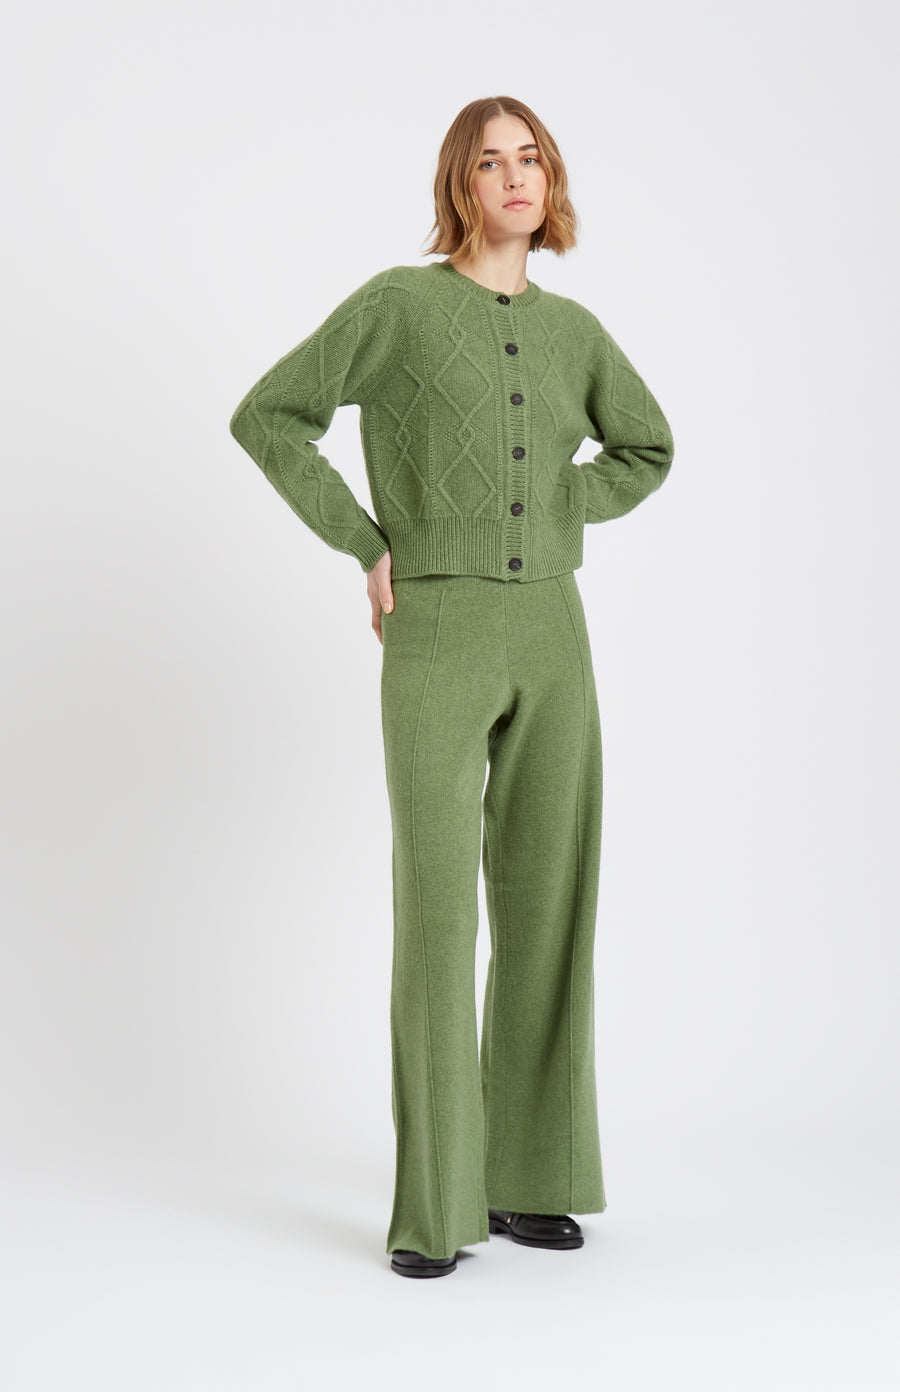 Pringle Multi Texture Cashmere blend cardigan in Wood Sage on model with matching trousers